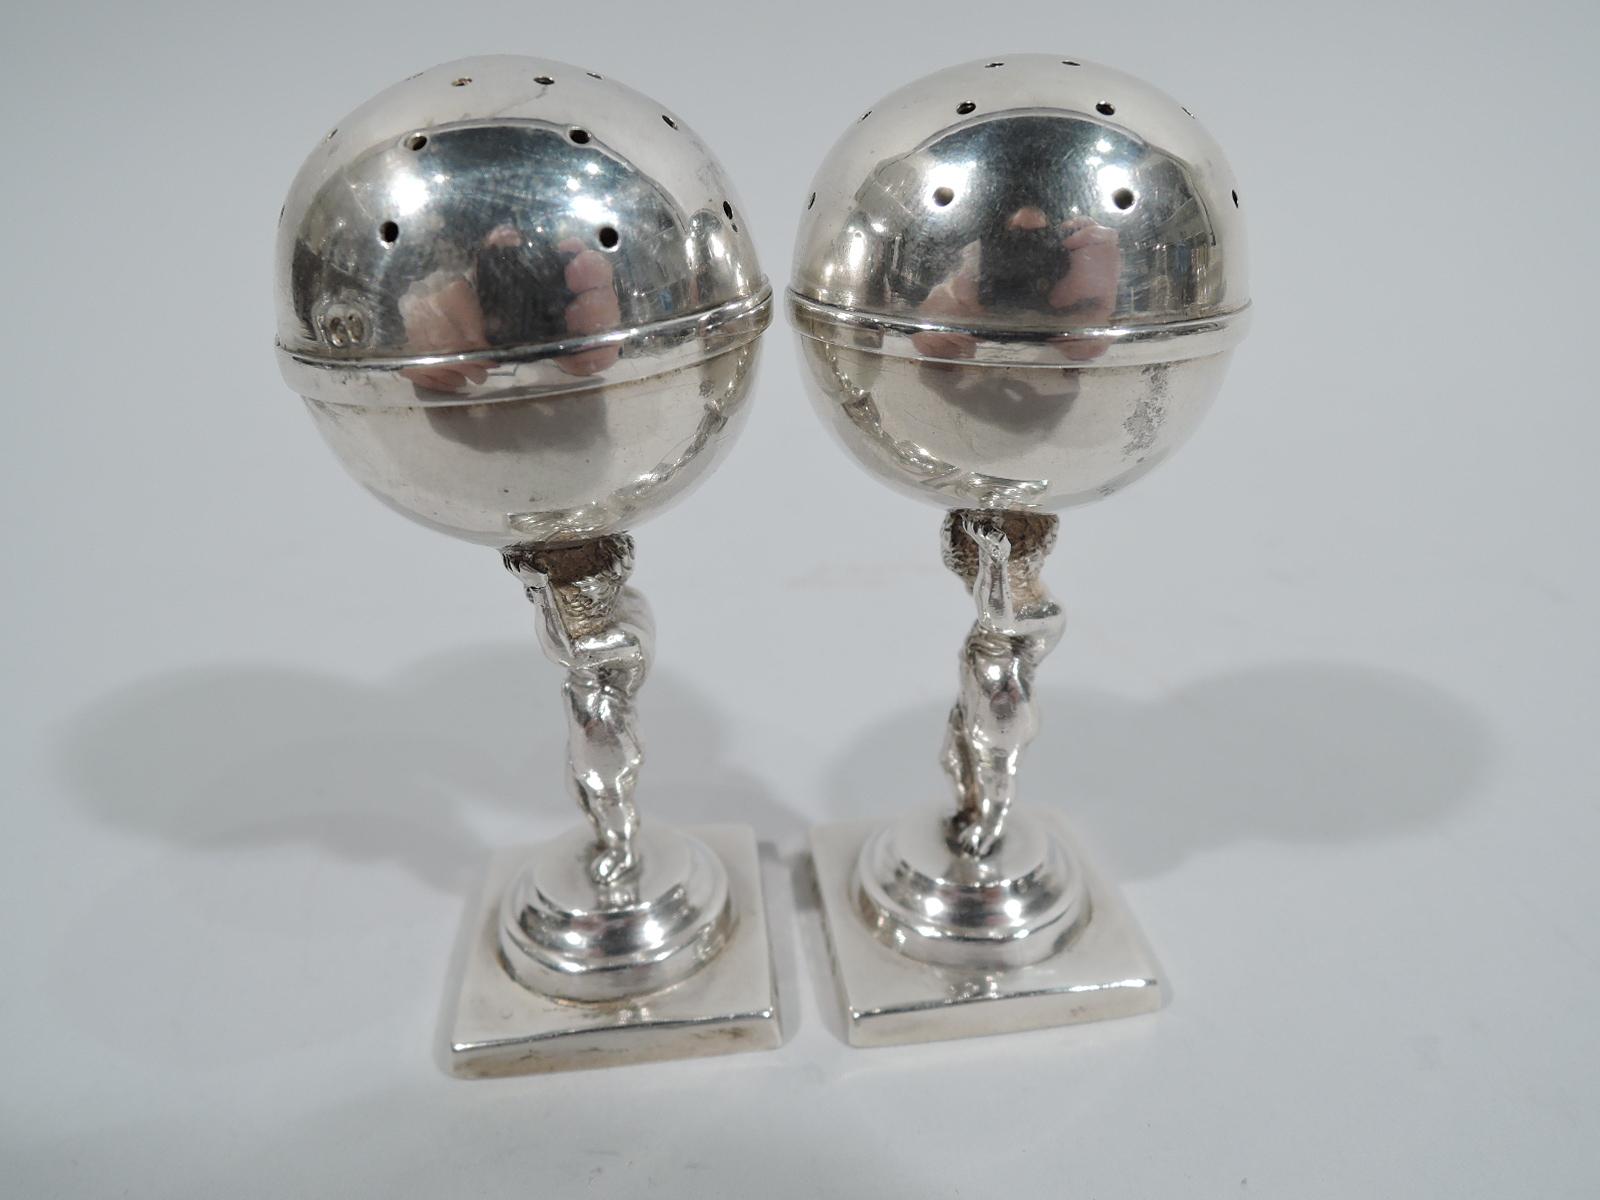 Pair of Victorian sterling silver salt & pepper shakers. Made by Stokes & Ireland in Birmingham in 1889. Each: A pierced globe is supported by a chubby, contrapposto cherub with wispy drapery and bare bottom, who strains under the weight (of the